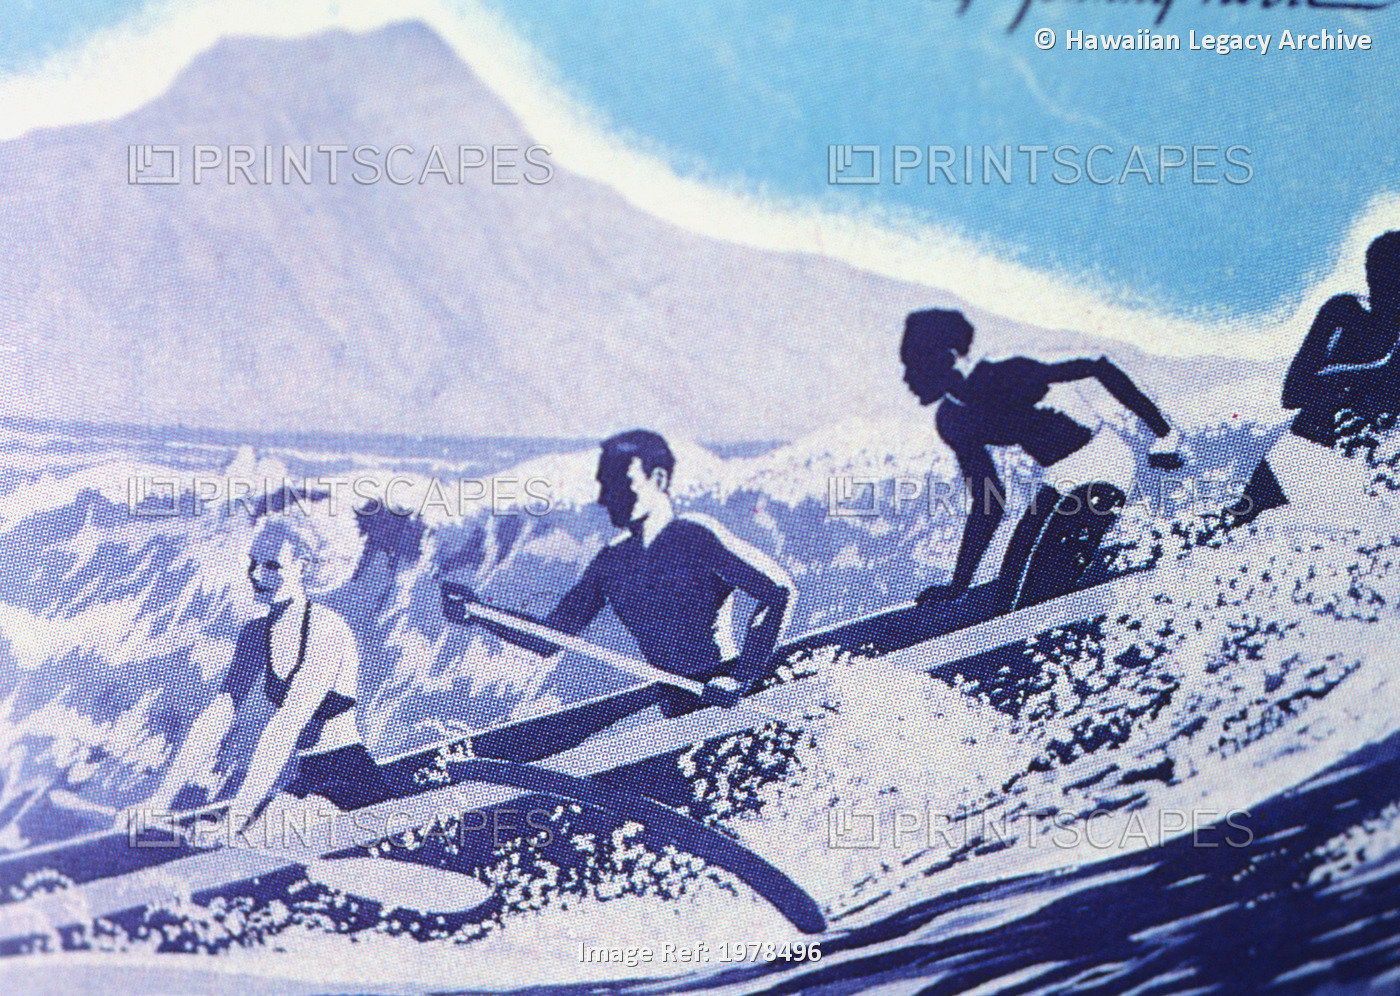 C.1940, Outrigger Canoe Surfing Wave With Tourists And Diamond Head.